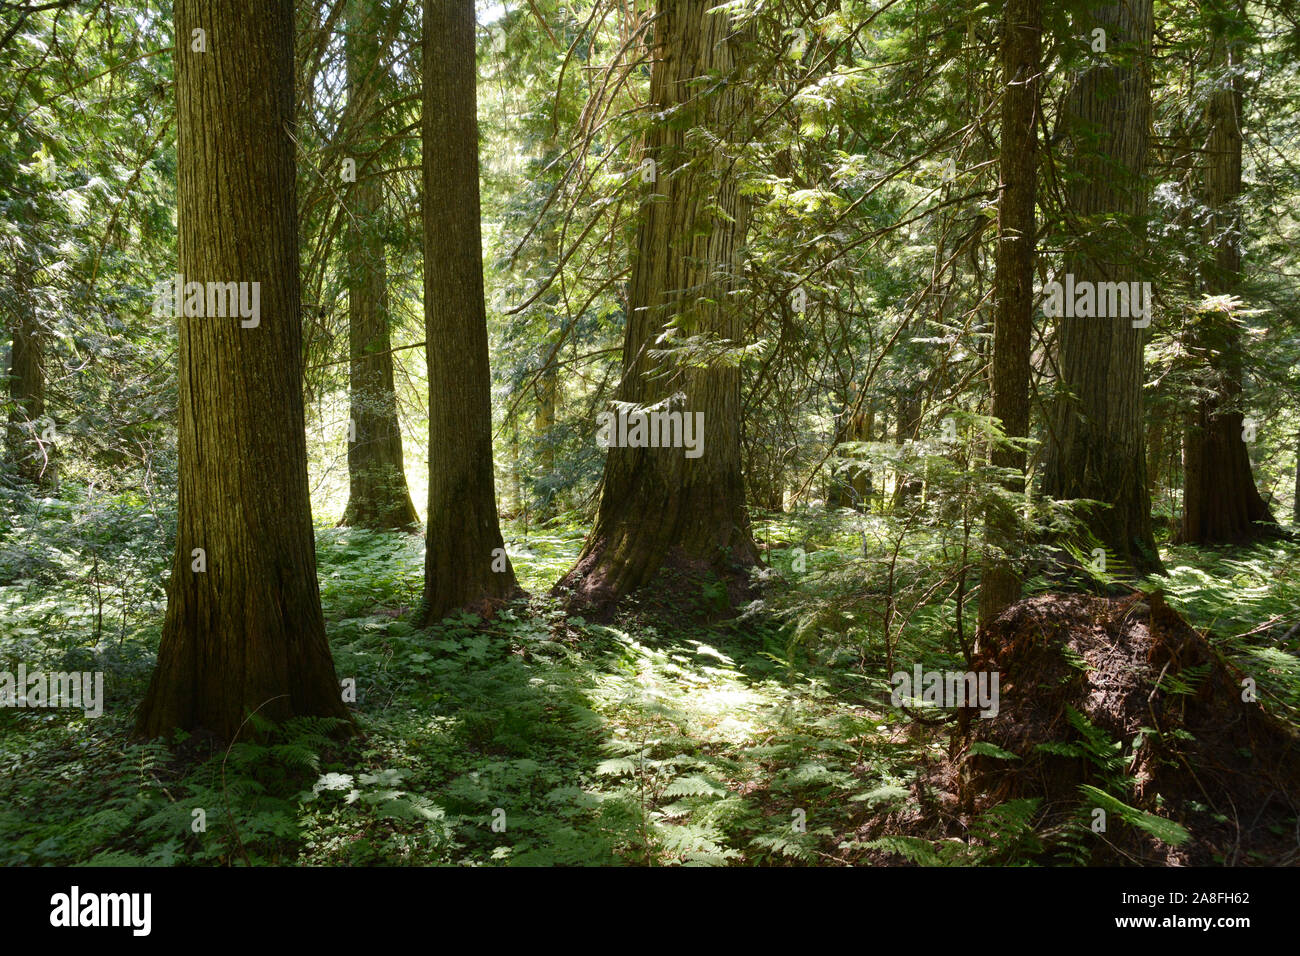 A stand of old growth Western Red Cedar trees in the interior temperate rainforest at Kokanee Creek, West Kootenays, British Columbia, Canada. Stock Photo